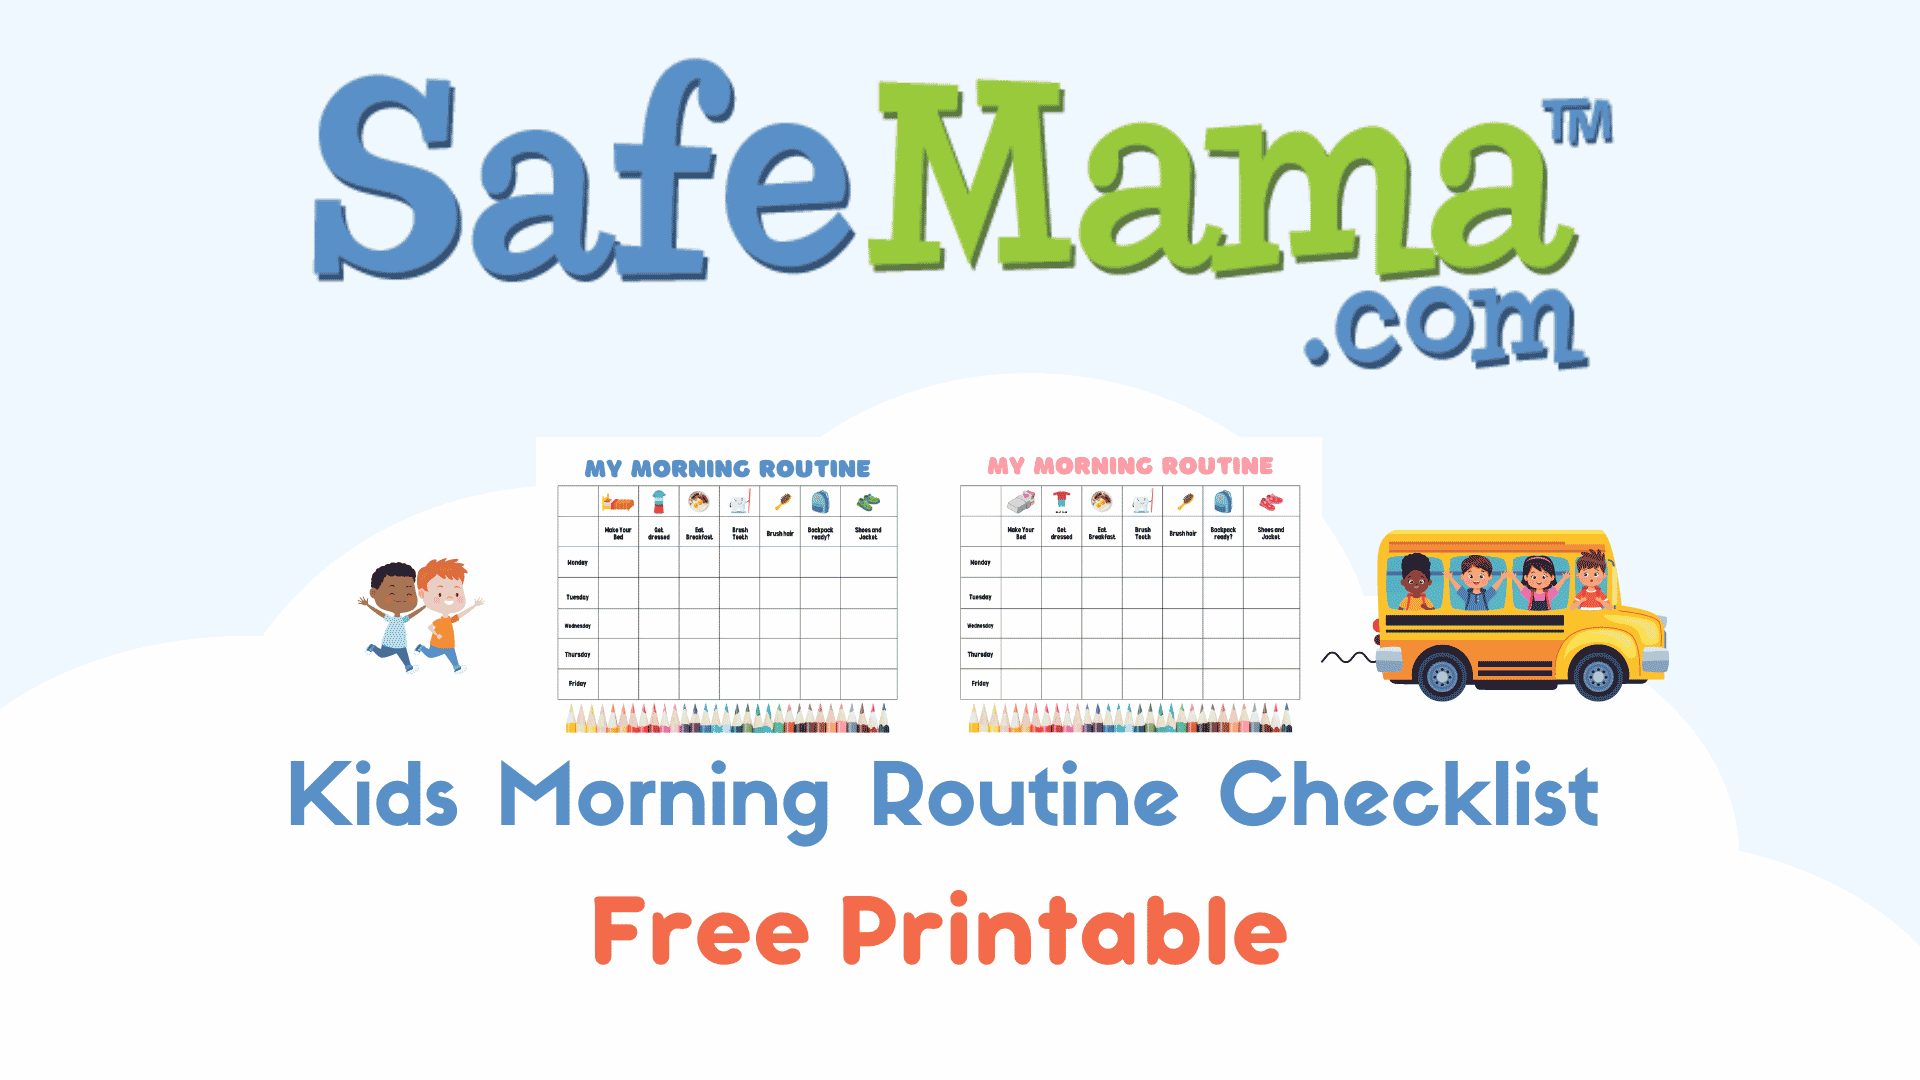 Kids Morning Routine Checklist Printable for School Days